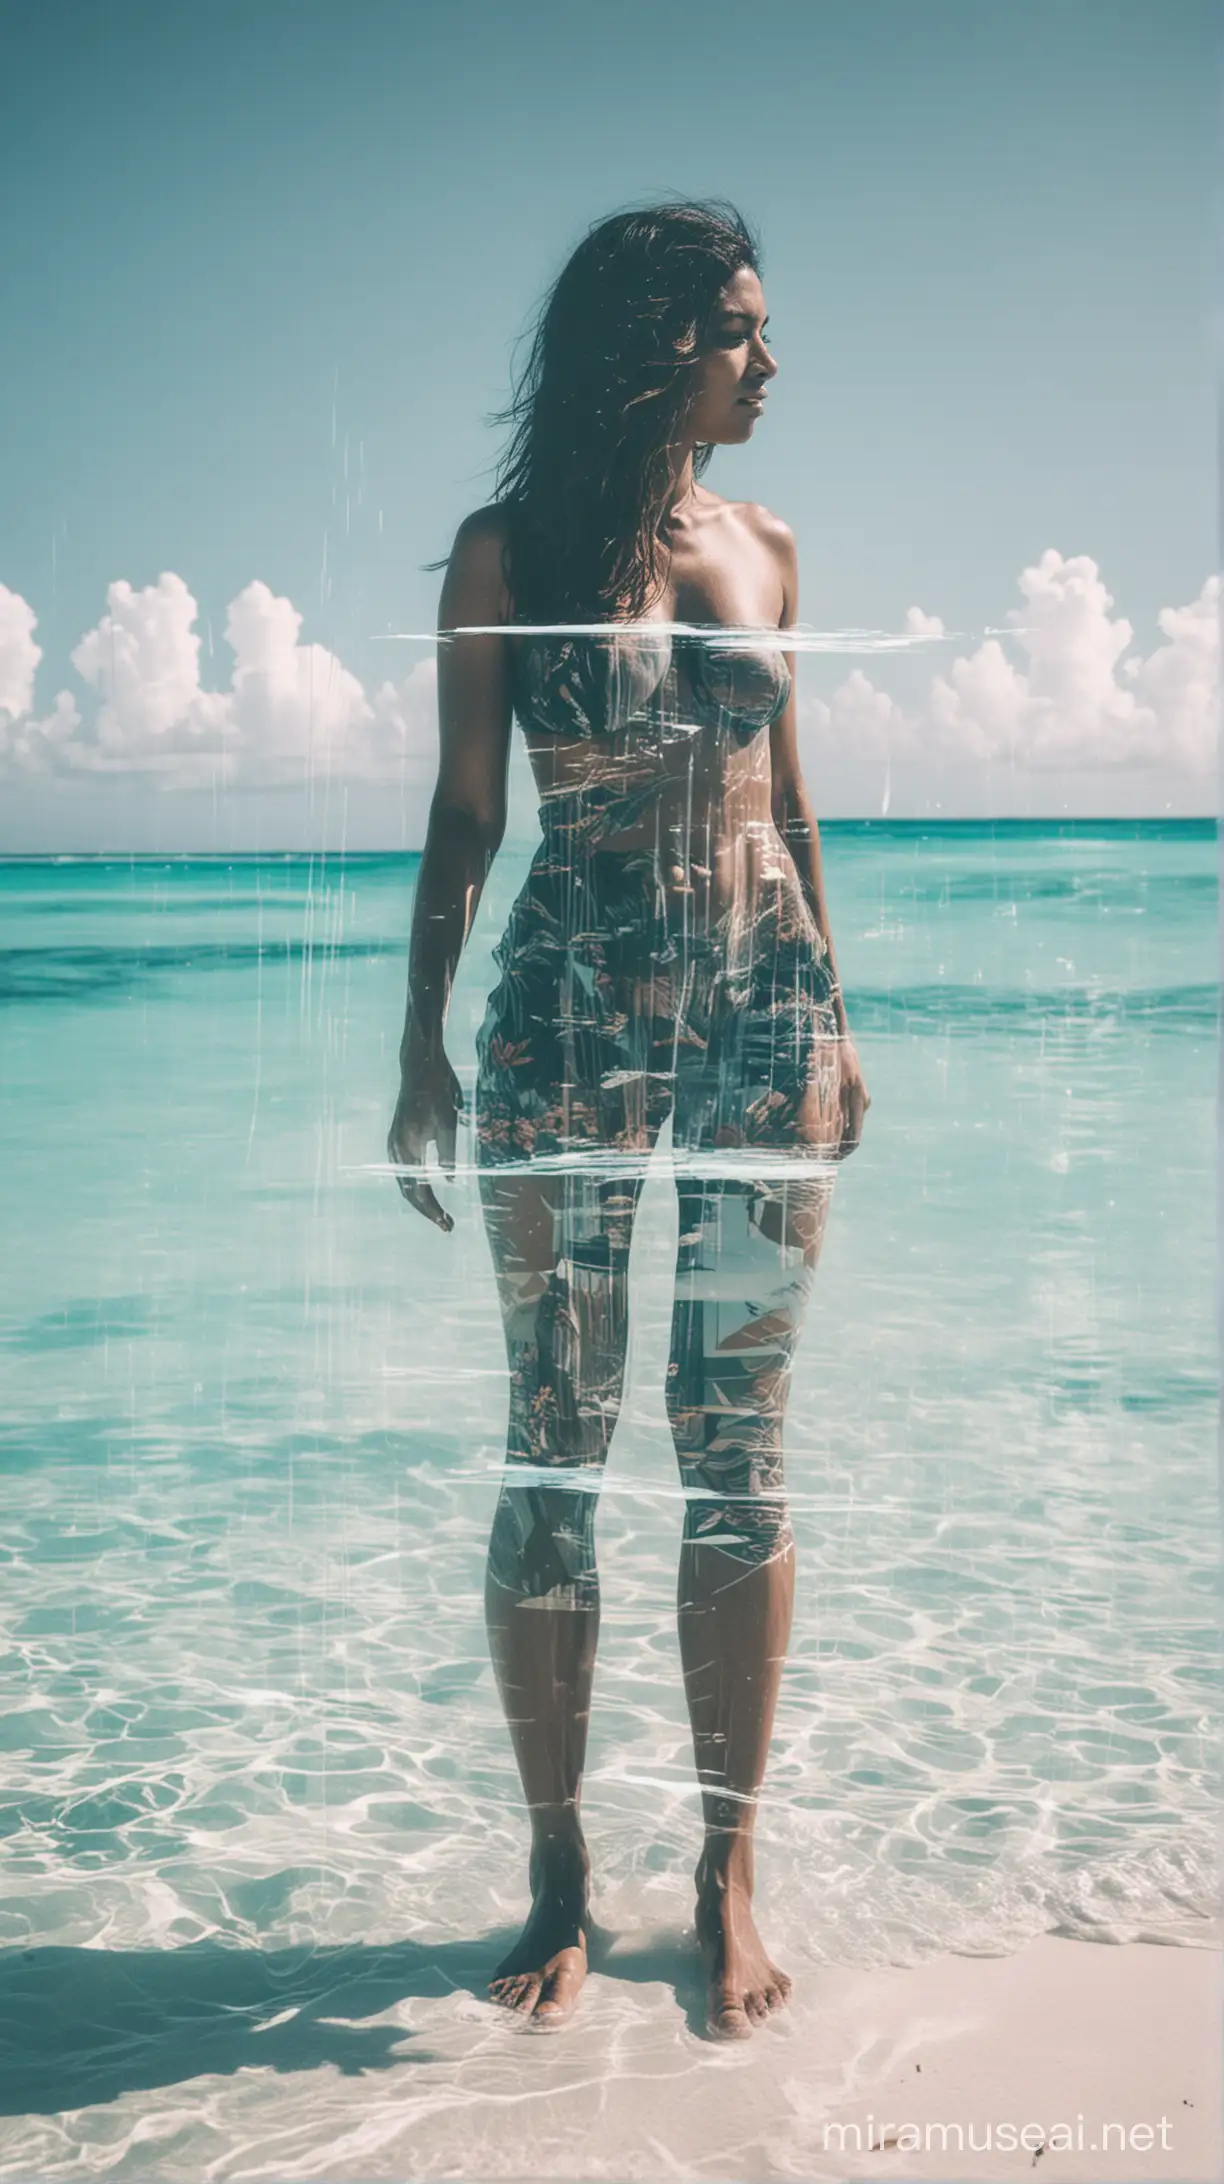 Candid extreme double exposure photography completely glitch , poetic human weird pose Maldives